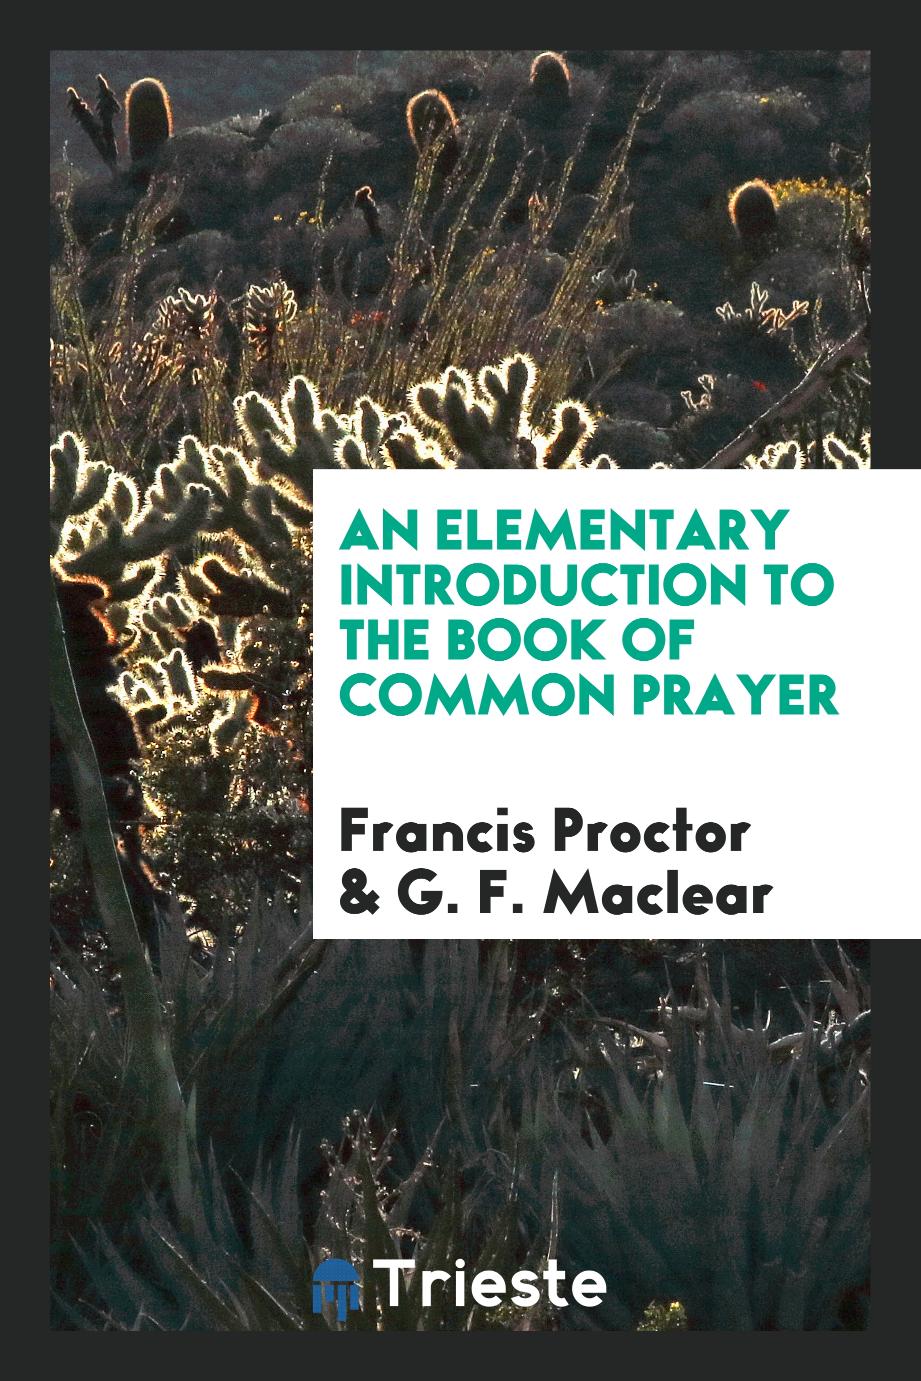 An elementary introduction to the Book of Common Prayer